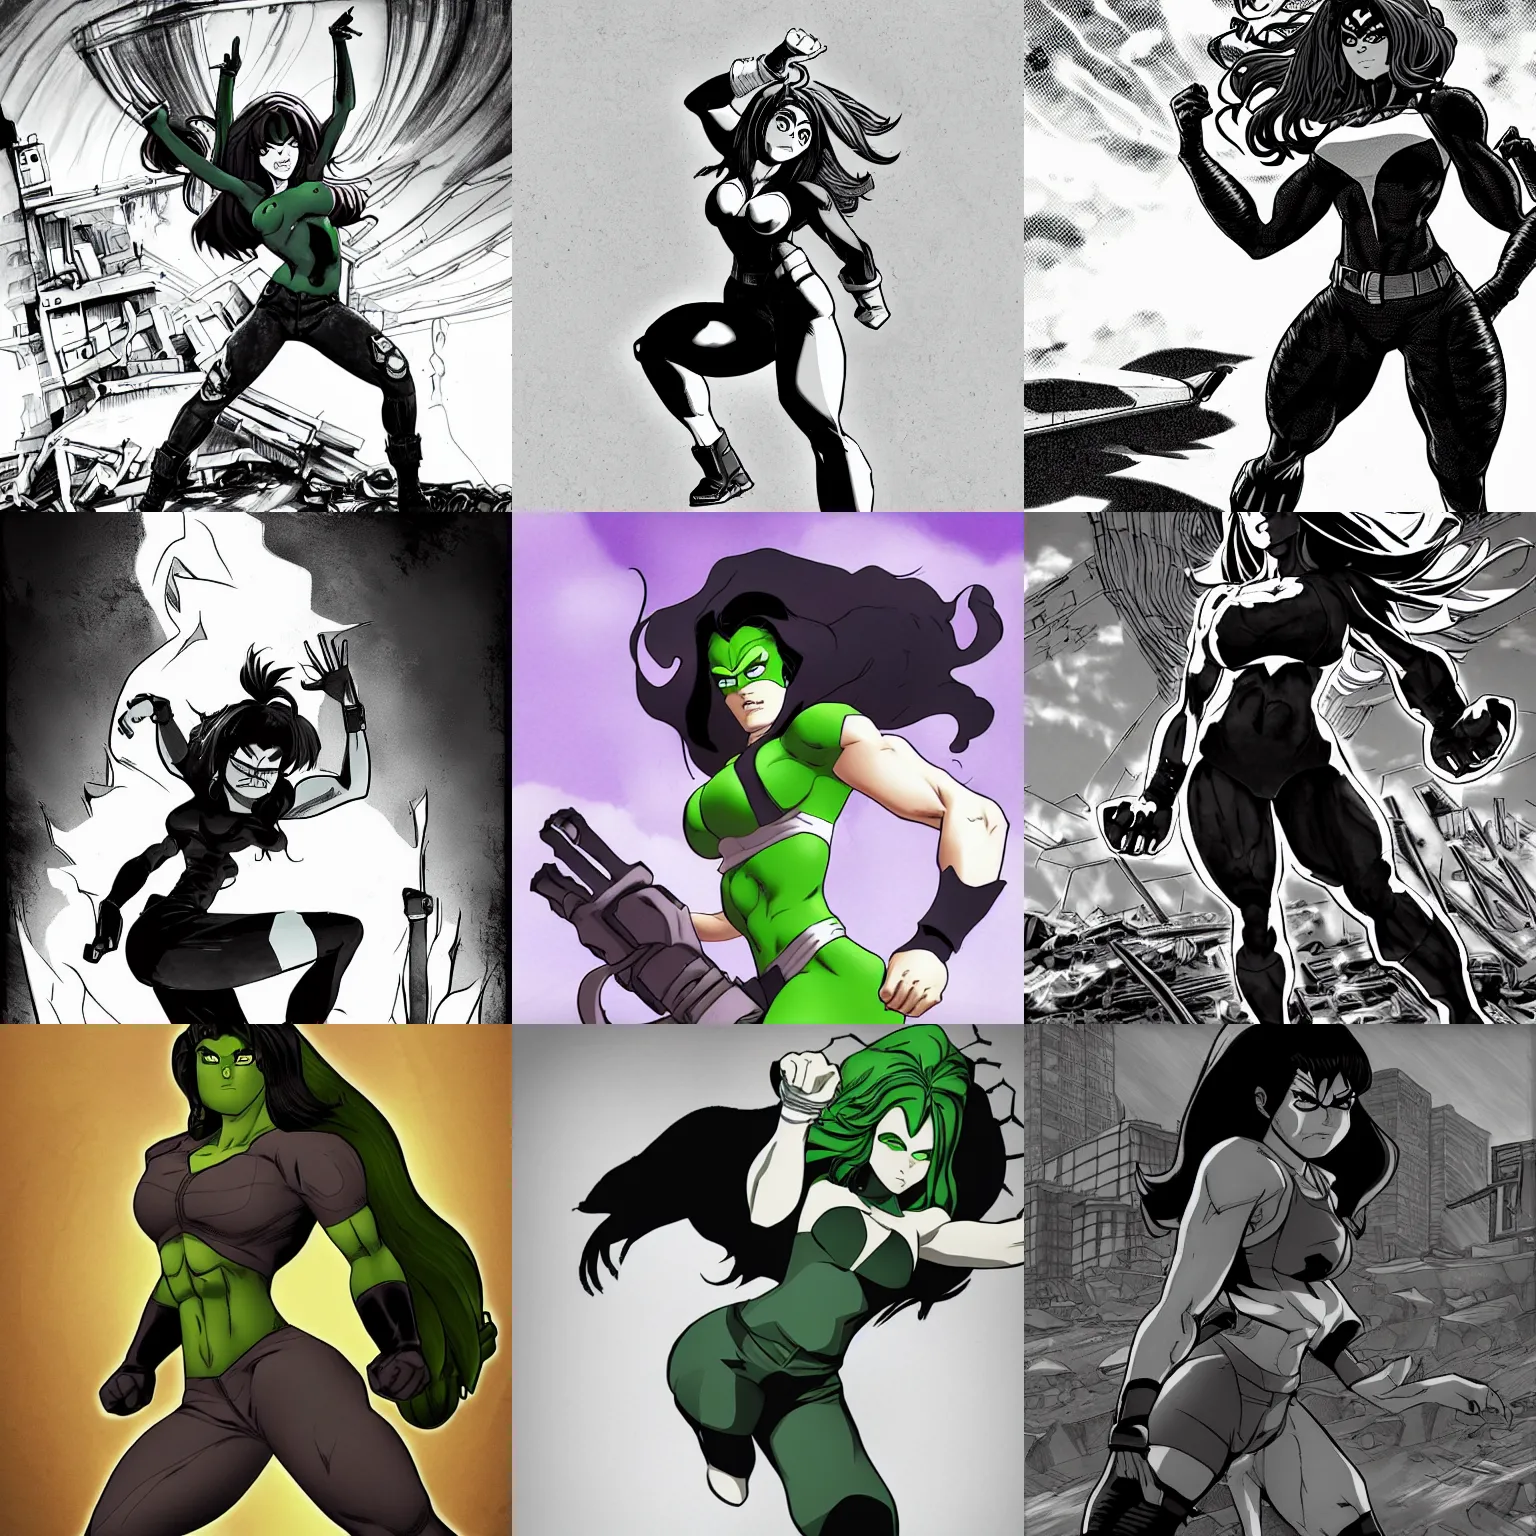 Prompt: she hulk, jojo anime style pencil and ink manga, full body action pose, dramatic lighting in a post apocalyptic wasteland